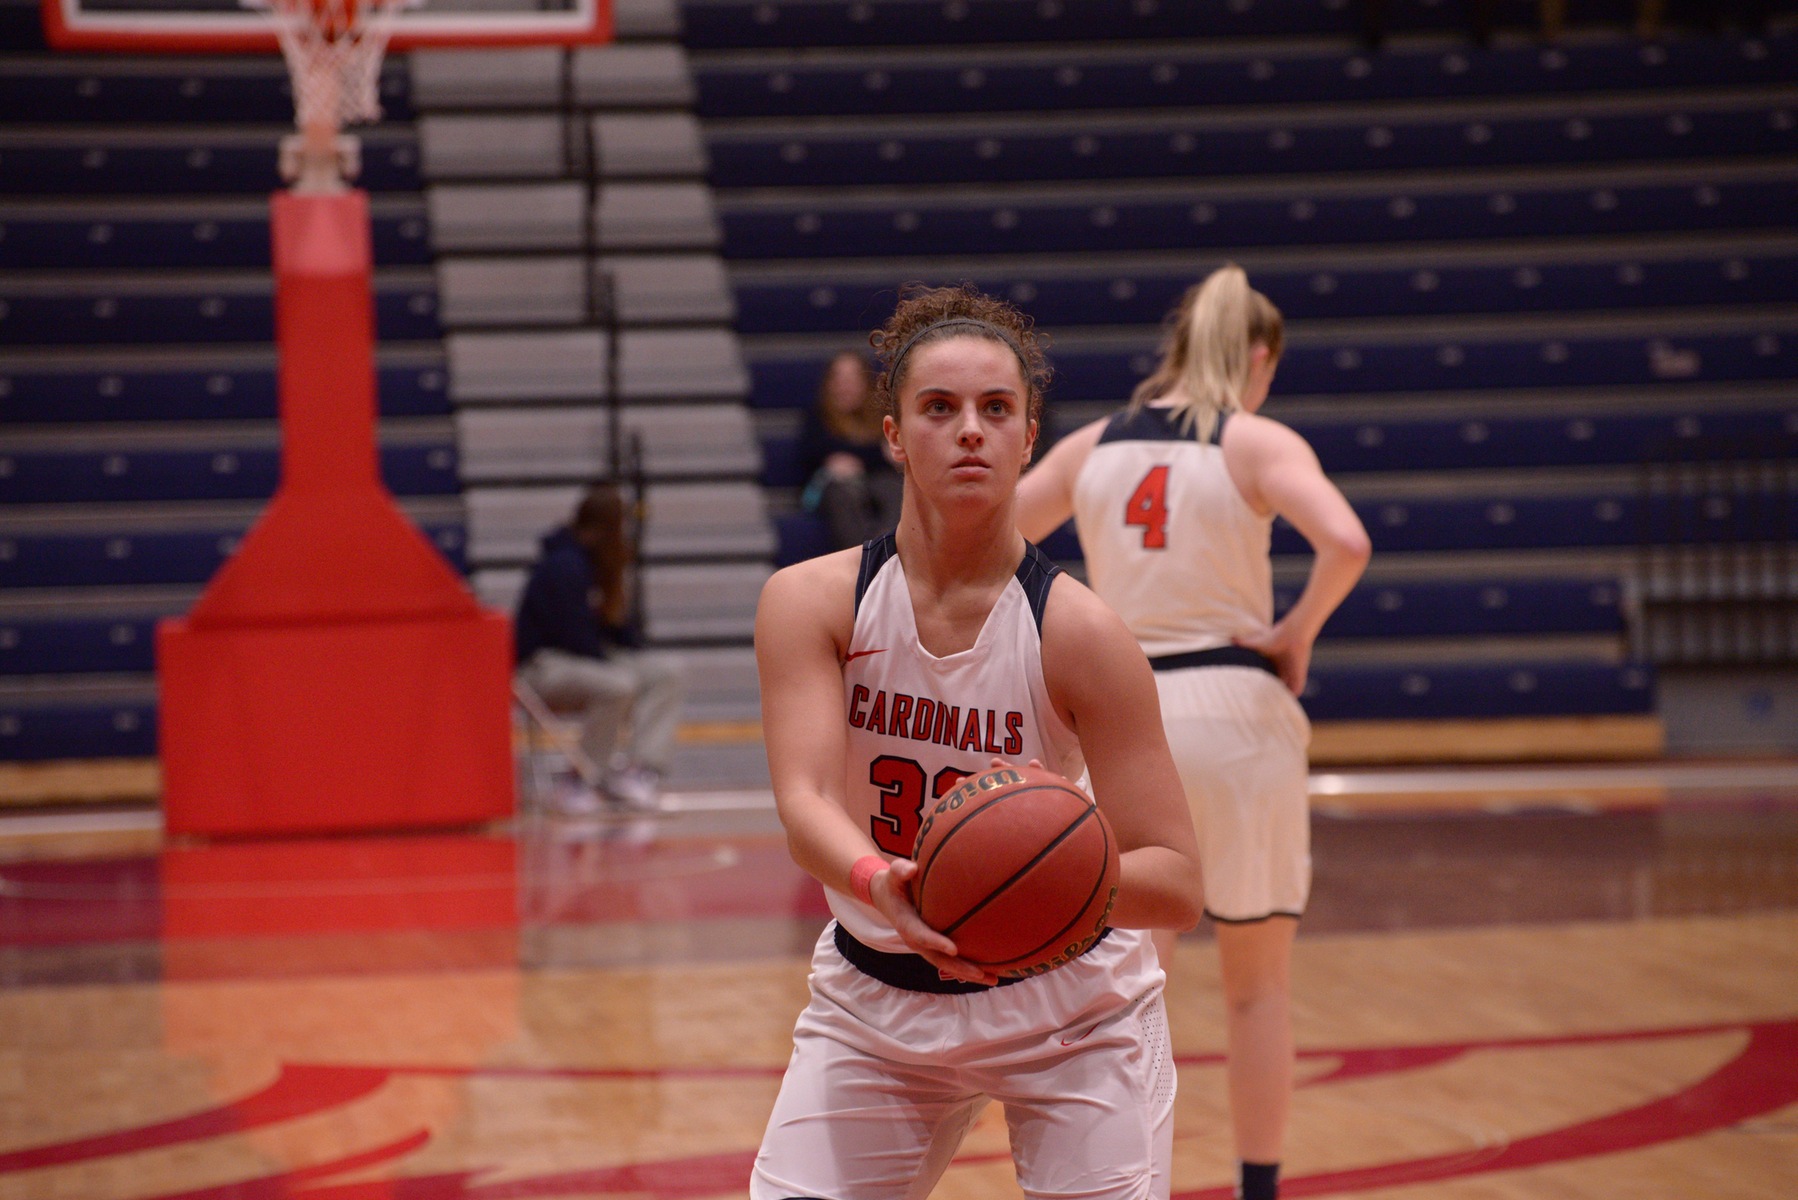 Duffy's 41 points and 16 rebounds lead Cardinals to victory at LSSU